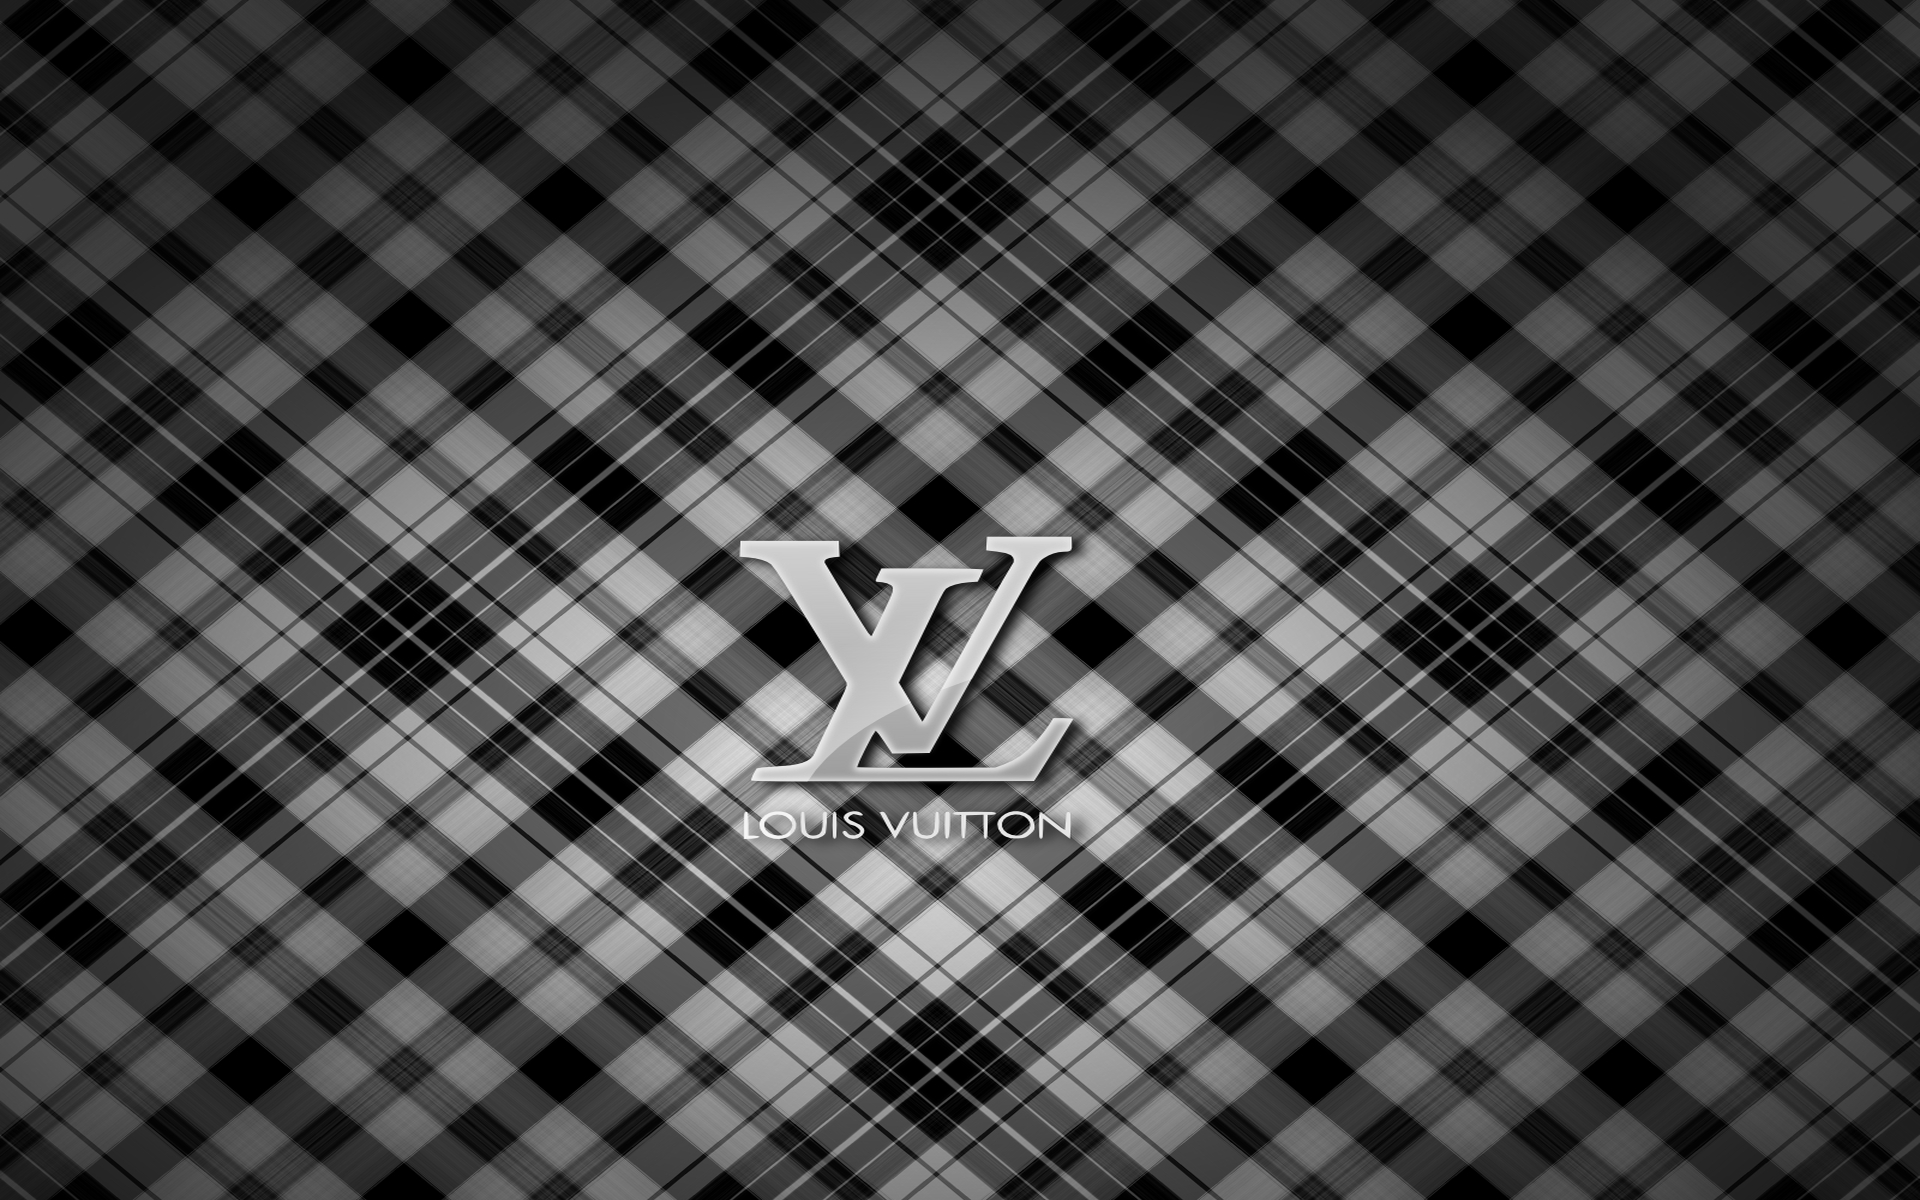 louis_vuitton_black_by_bmgreatness1200.jpg